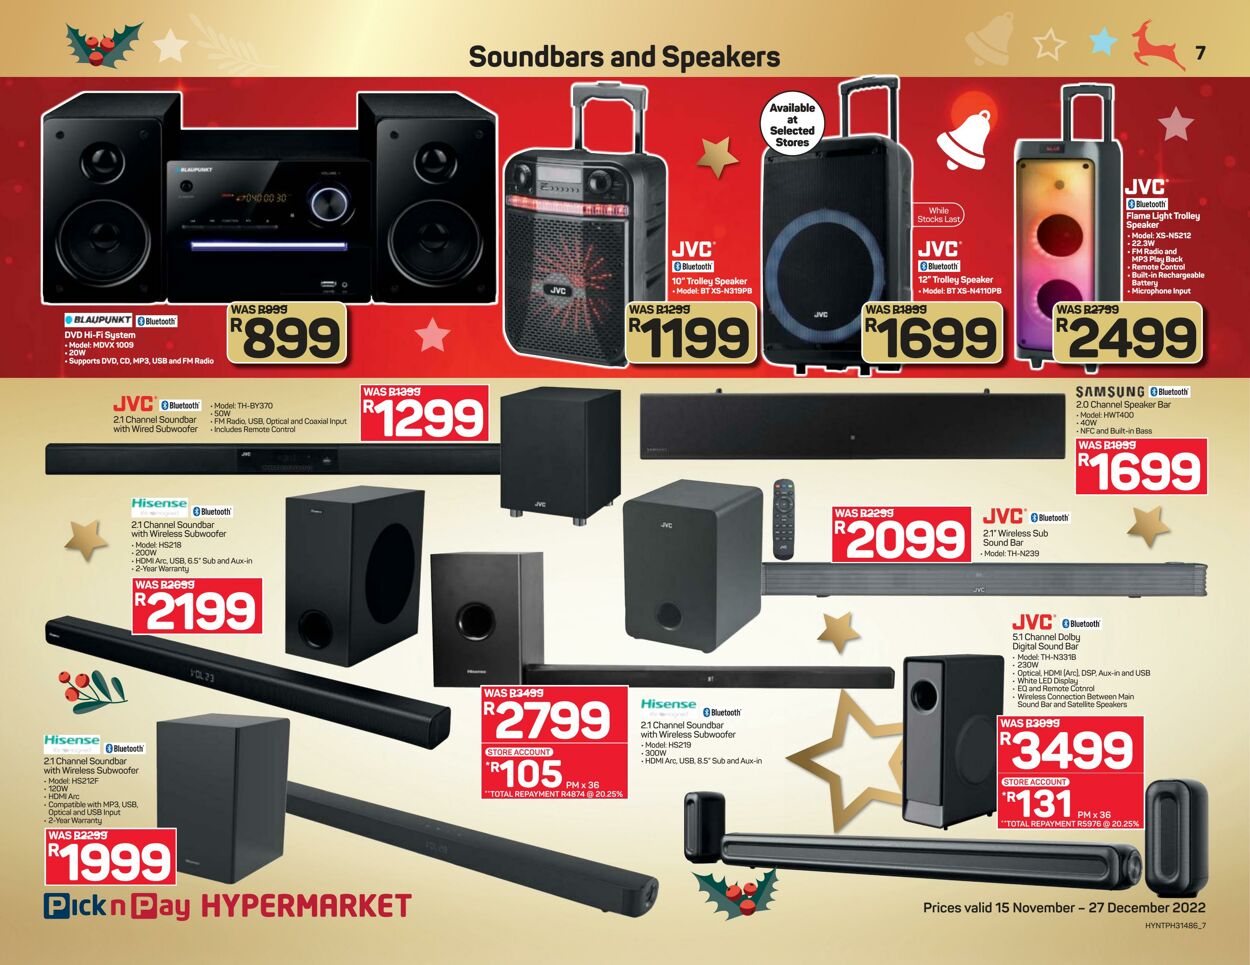 Special Pick n Pay 15.11.2022 - 27.12.2022